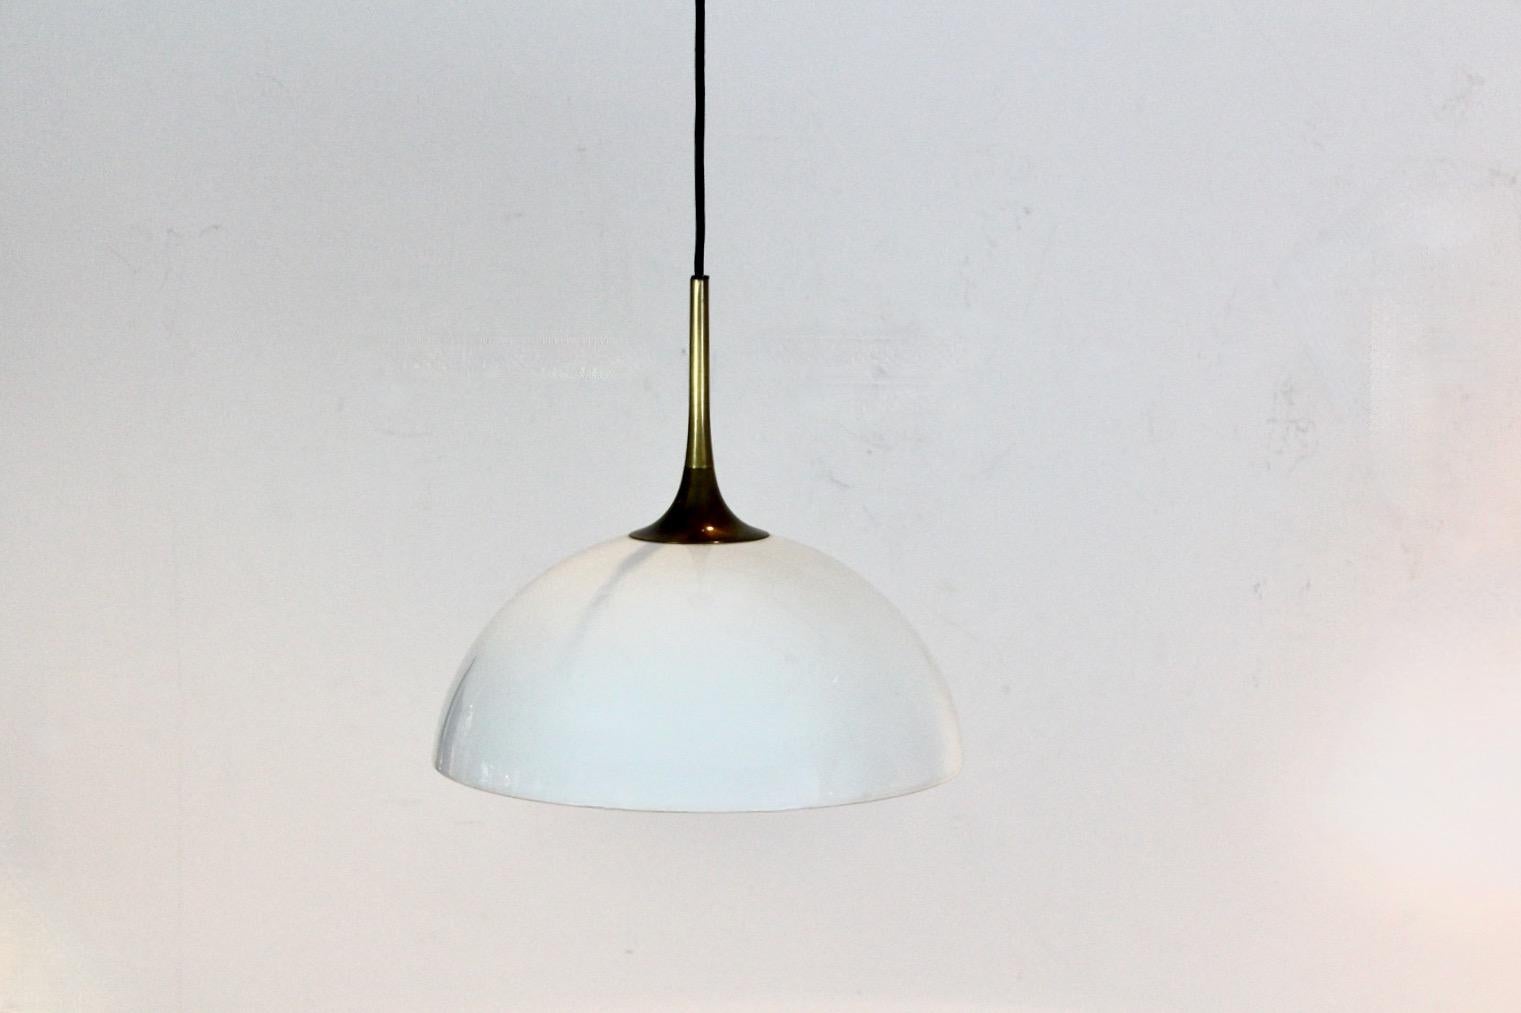 Elegant Pair of Brass and White-Opal Glass Pendant Lights by Florian Schulz In Good Condition For Sale In Voorburg, NL